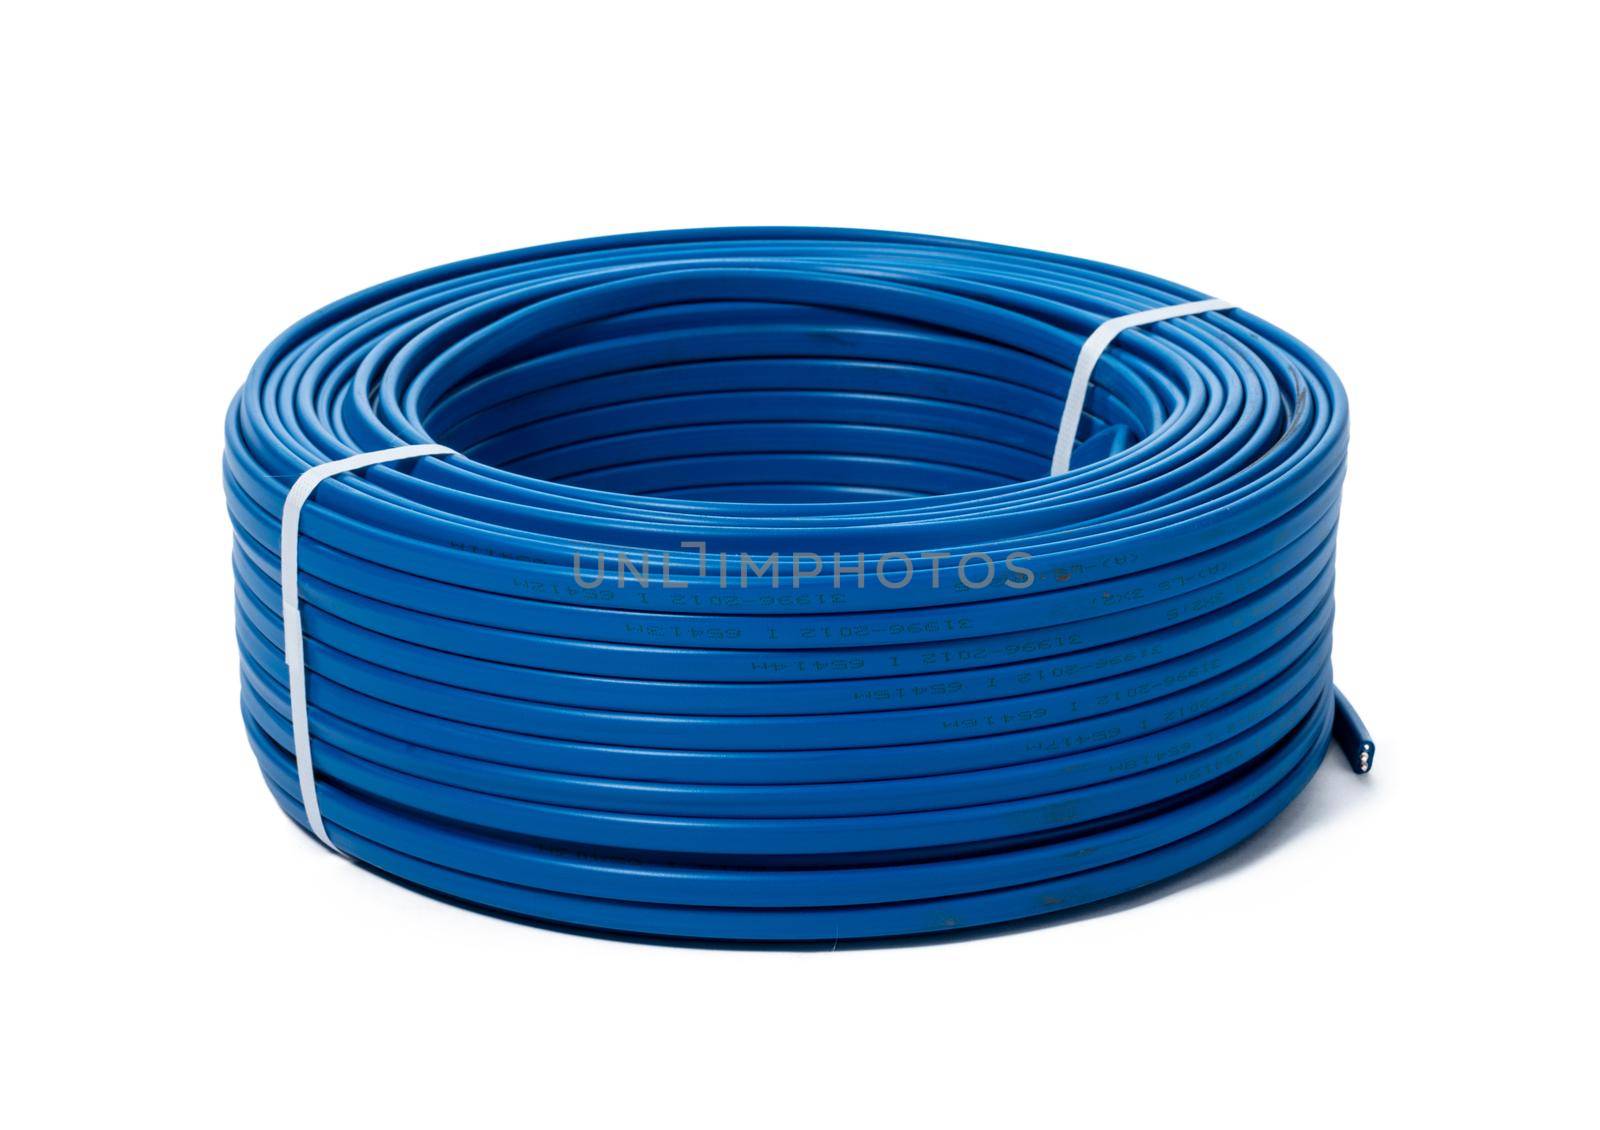 coils of blue cable isolated on white background. High quality photo